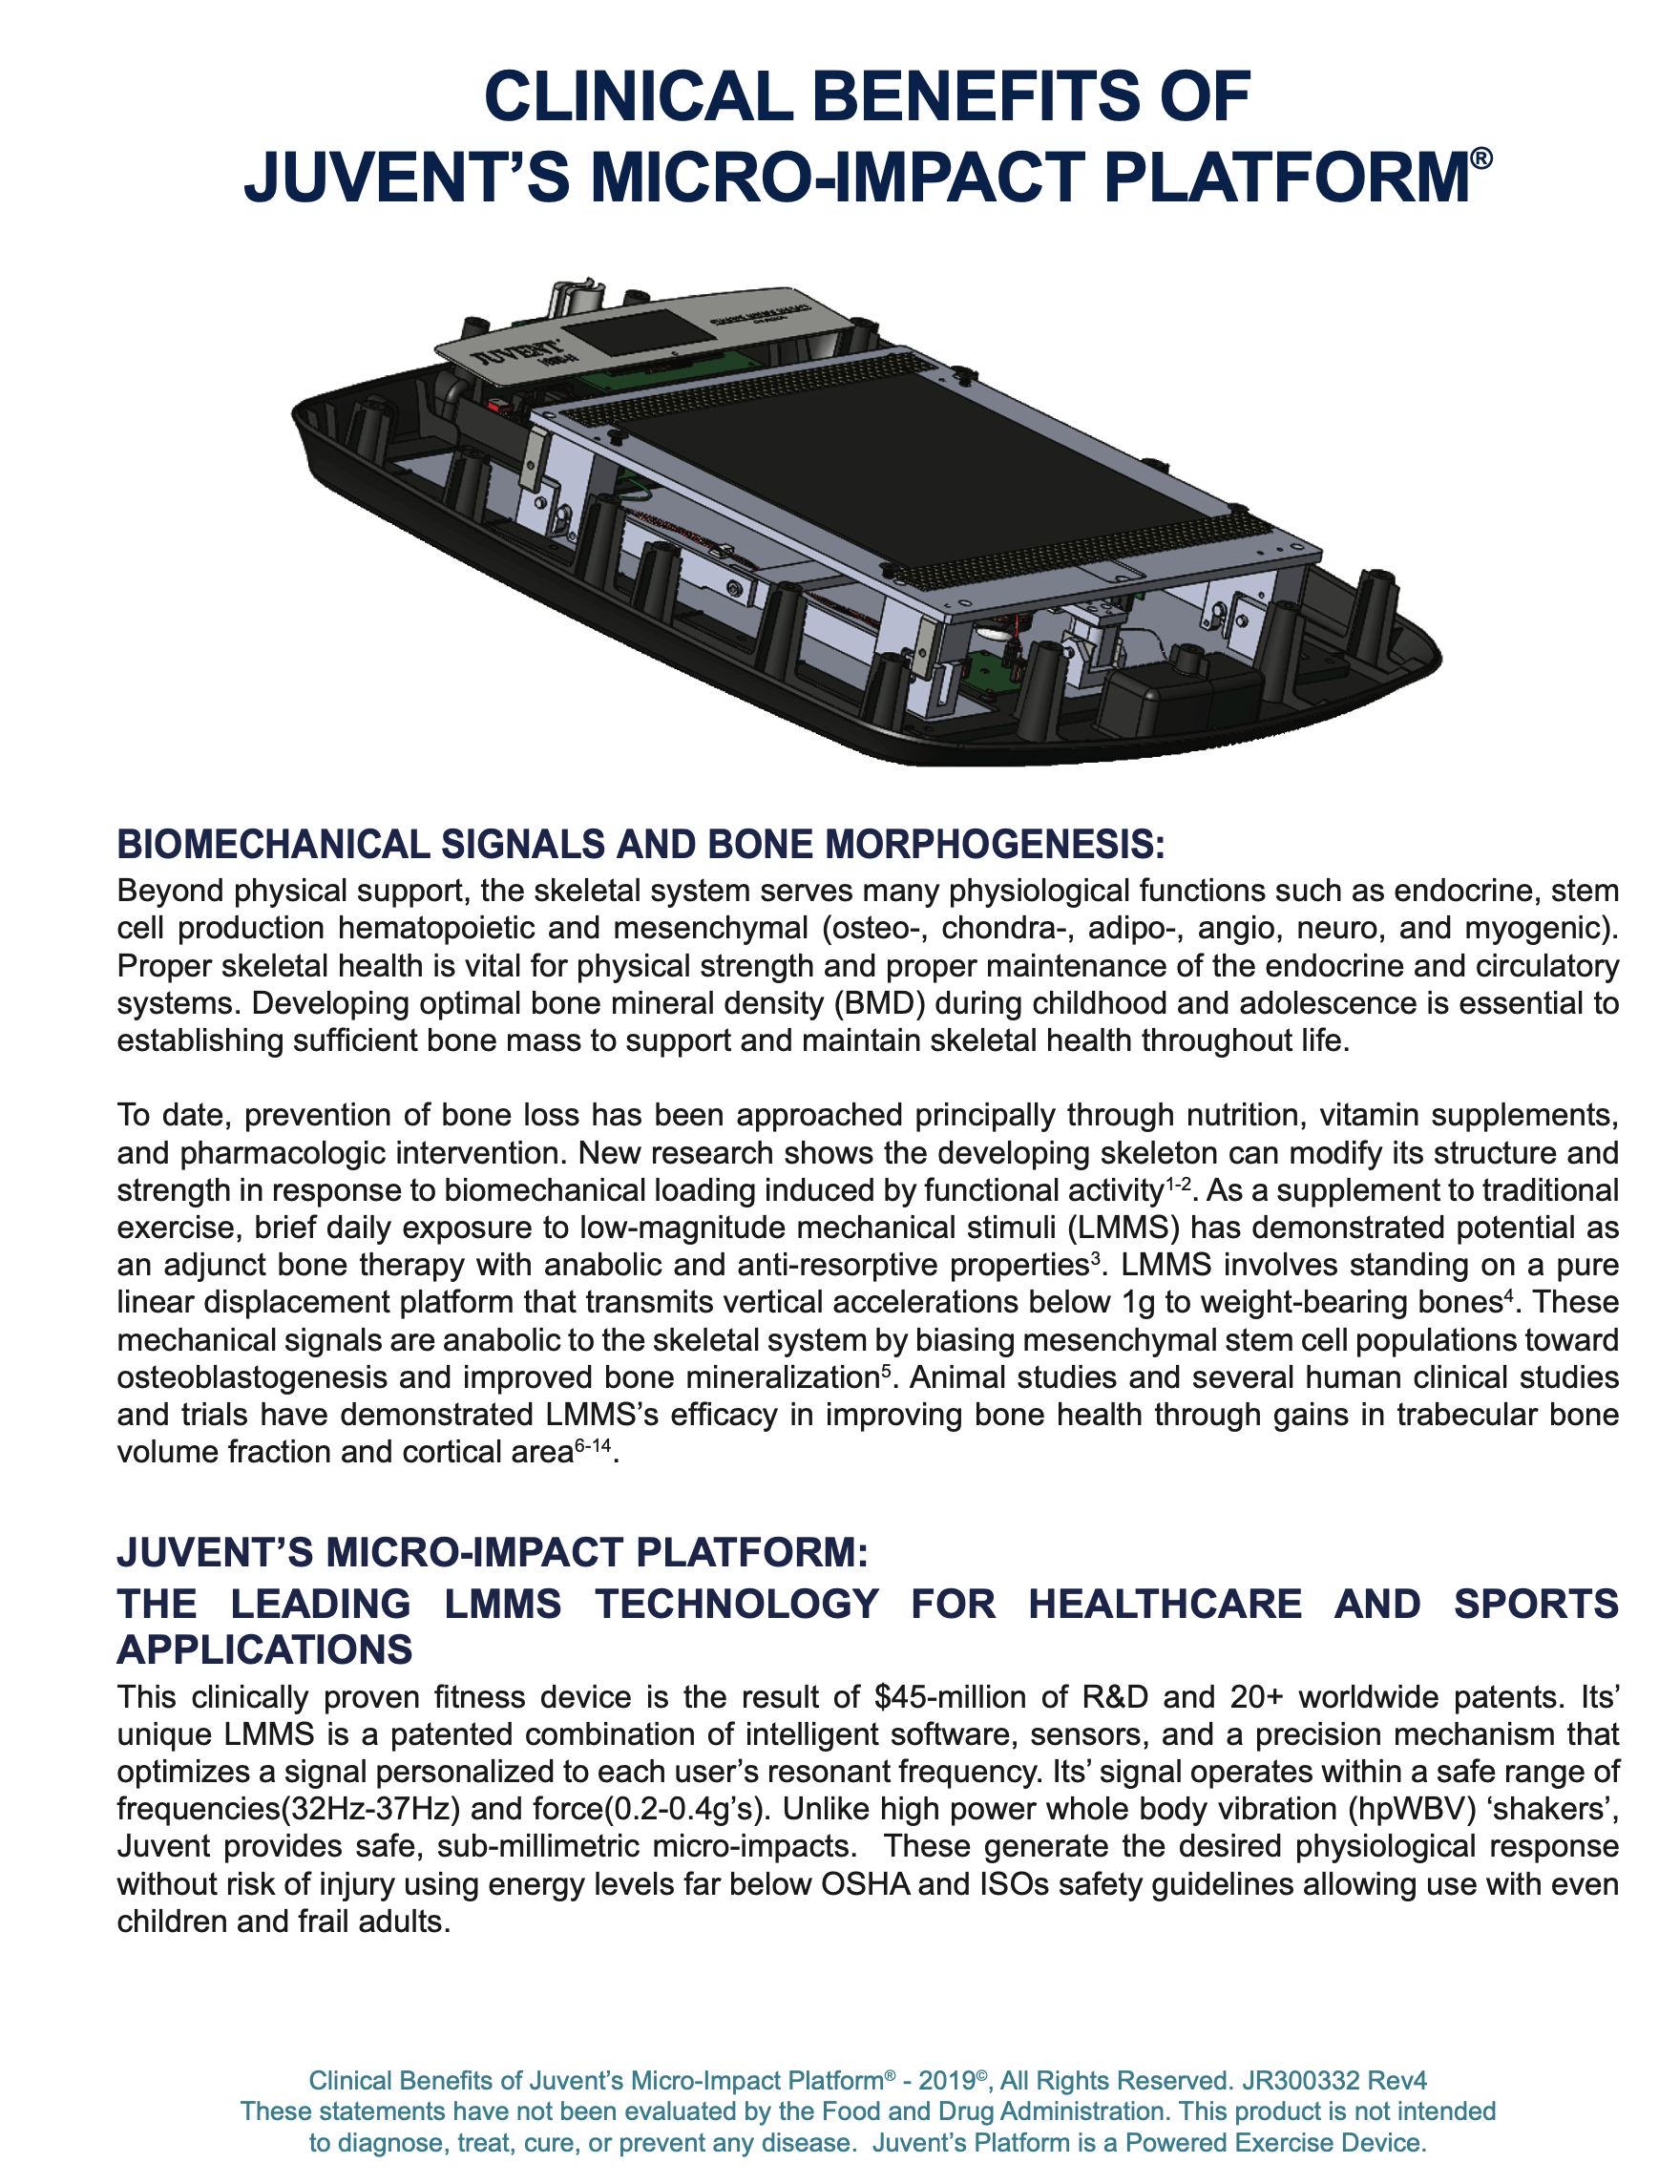 Clinical benefits of Juvent's Micro-Impact platform with a diagram of the inner workings of the platform.